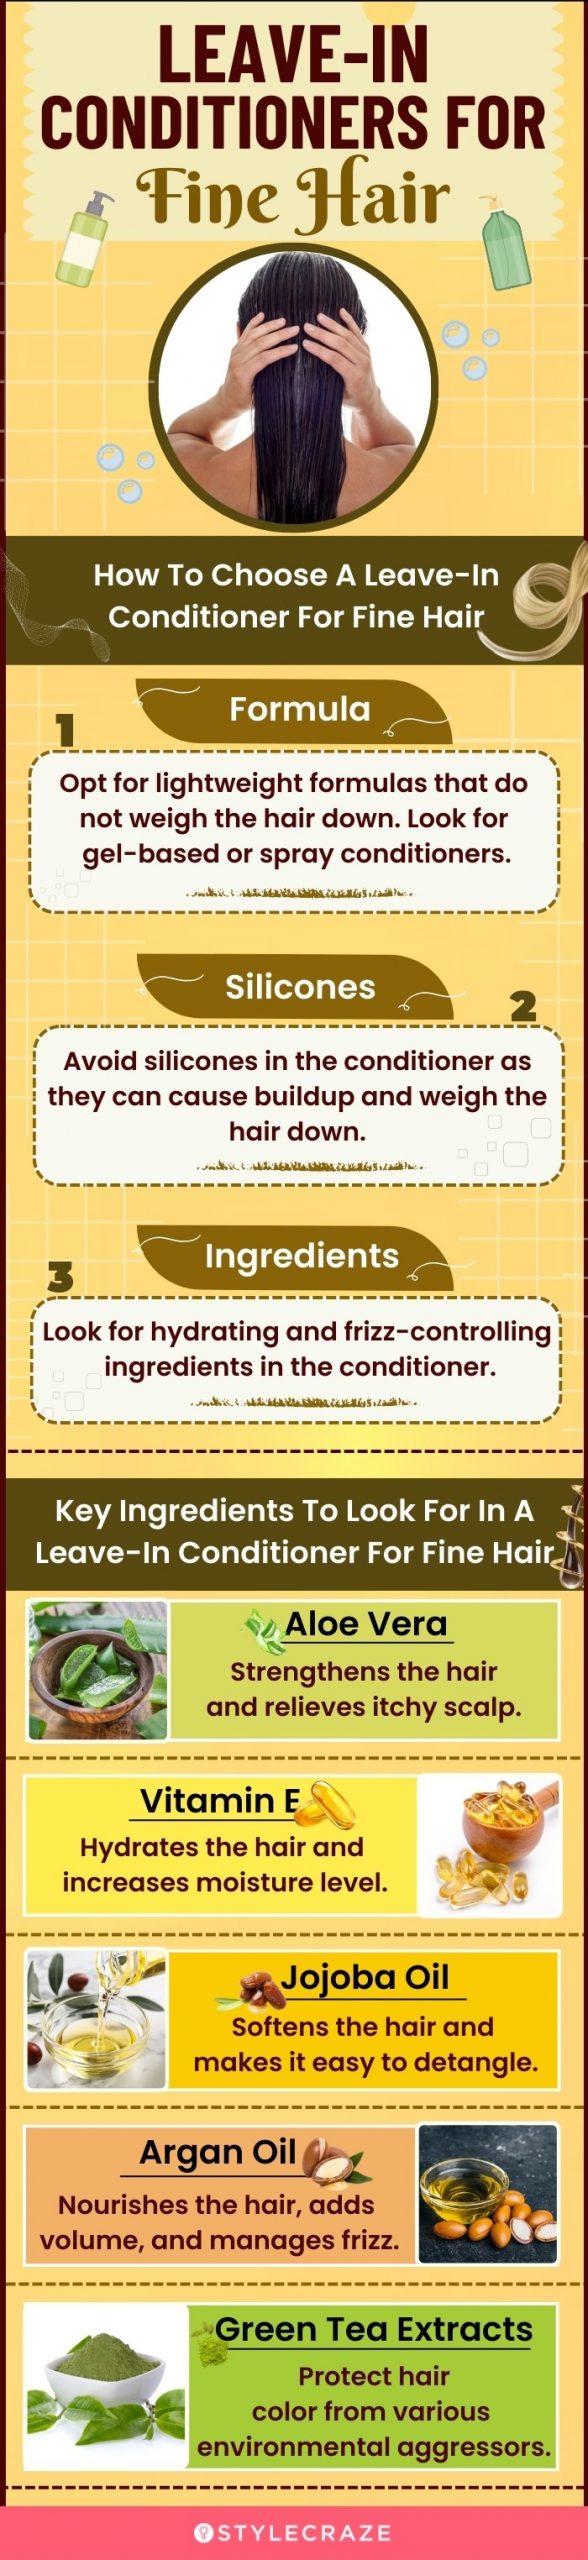 Leave-In Conditioners For Fine Hair (infographic)